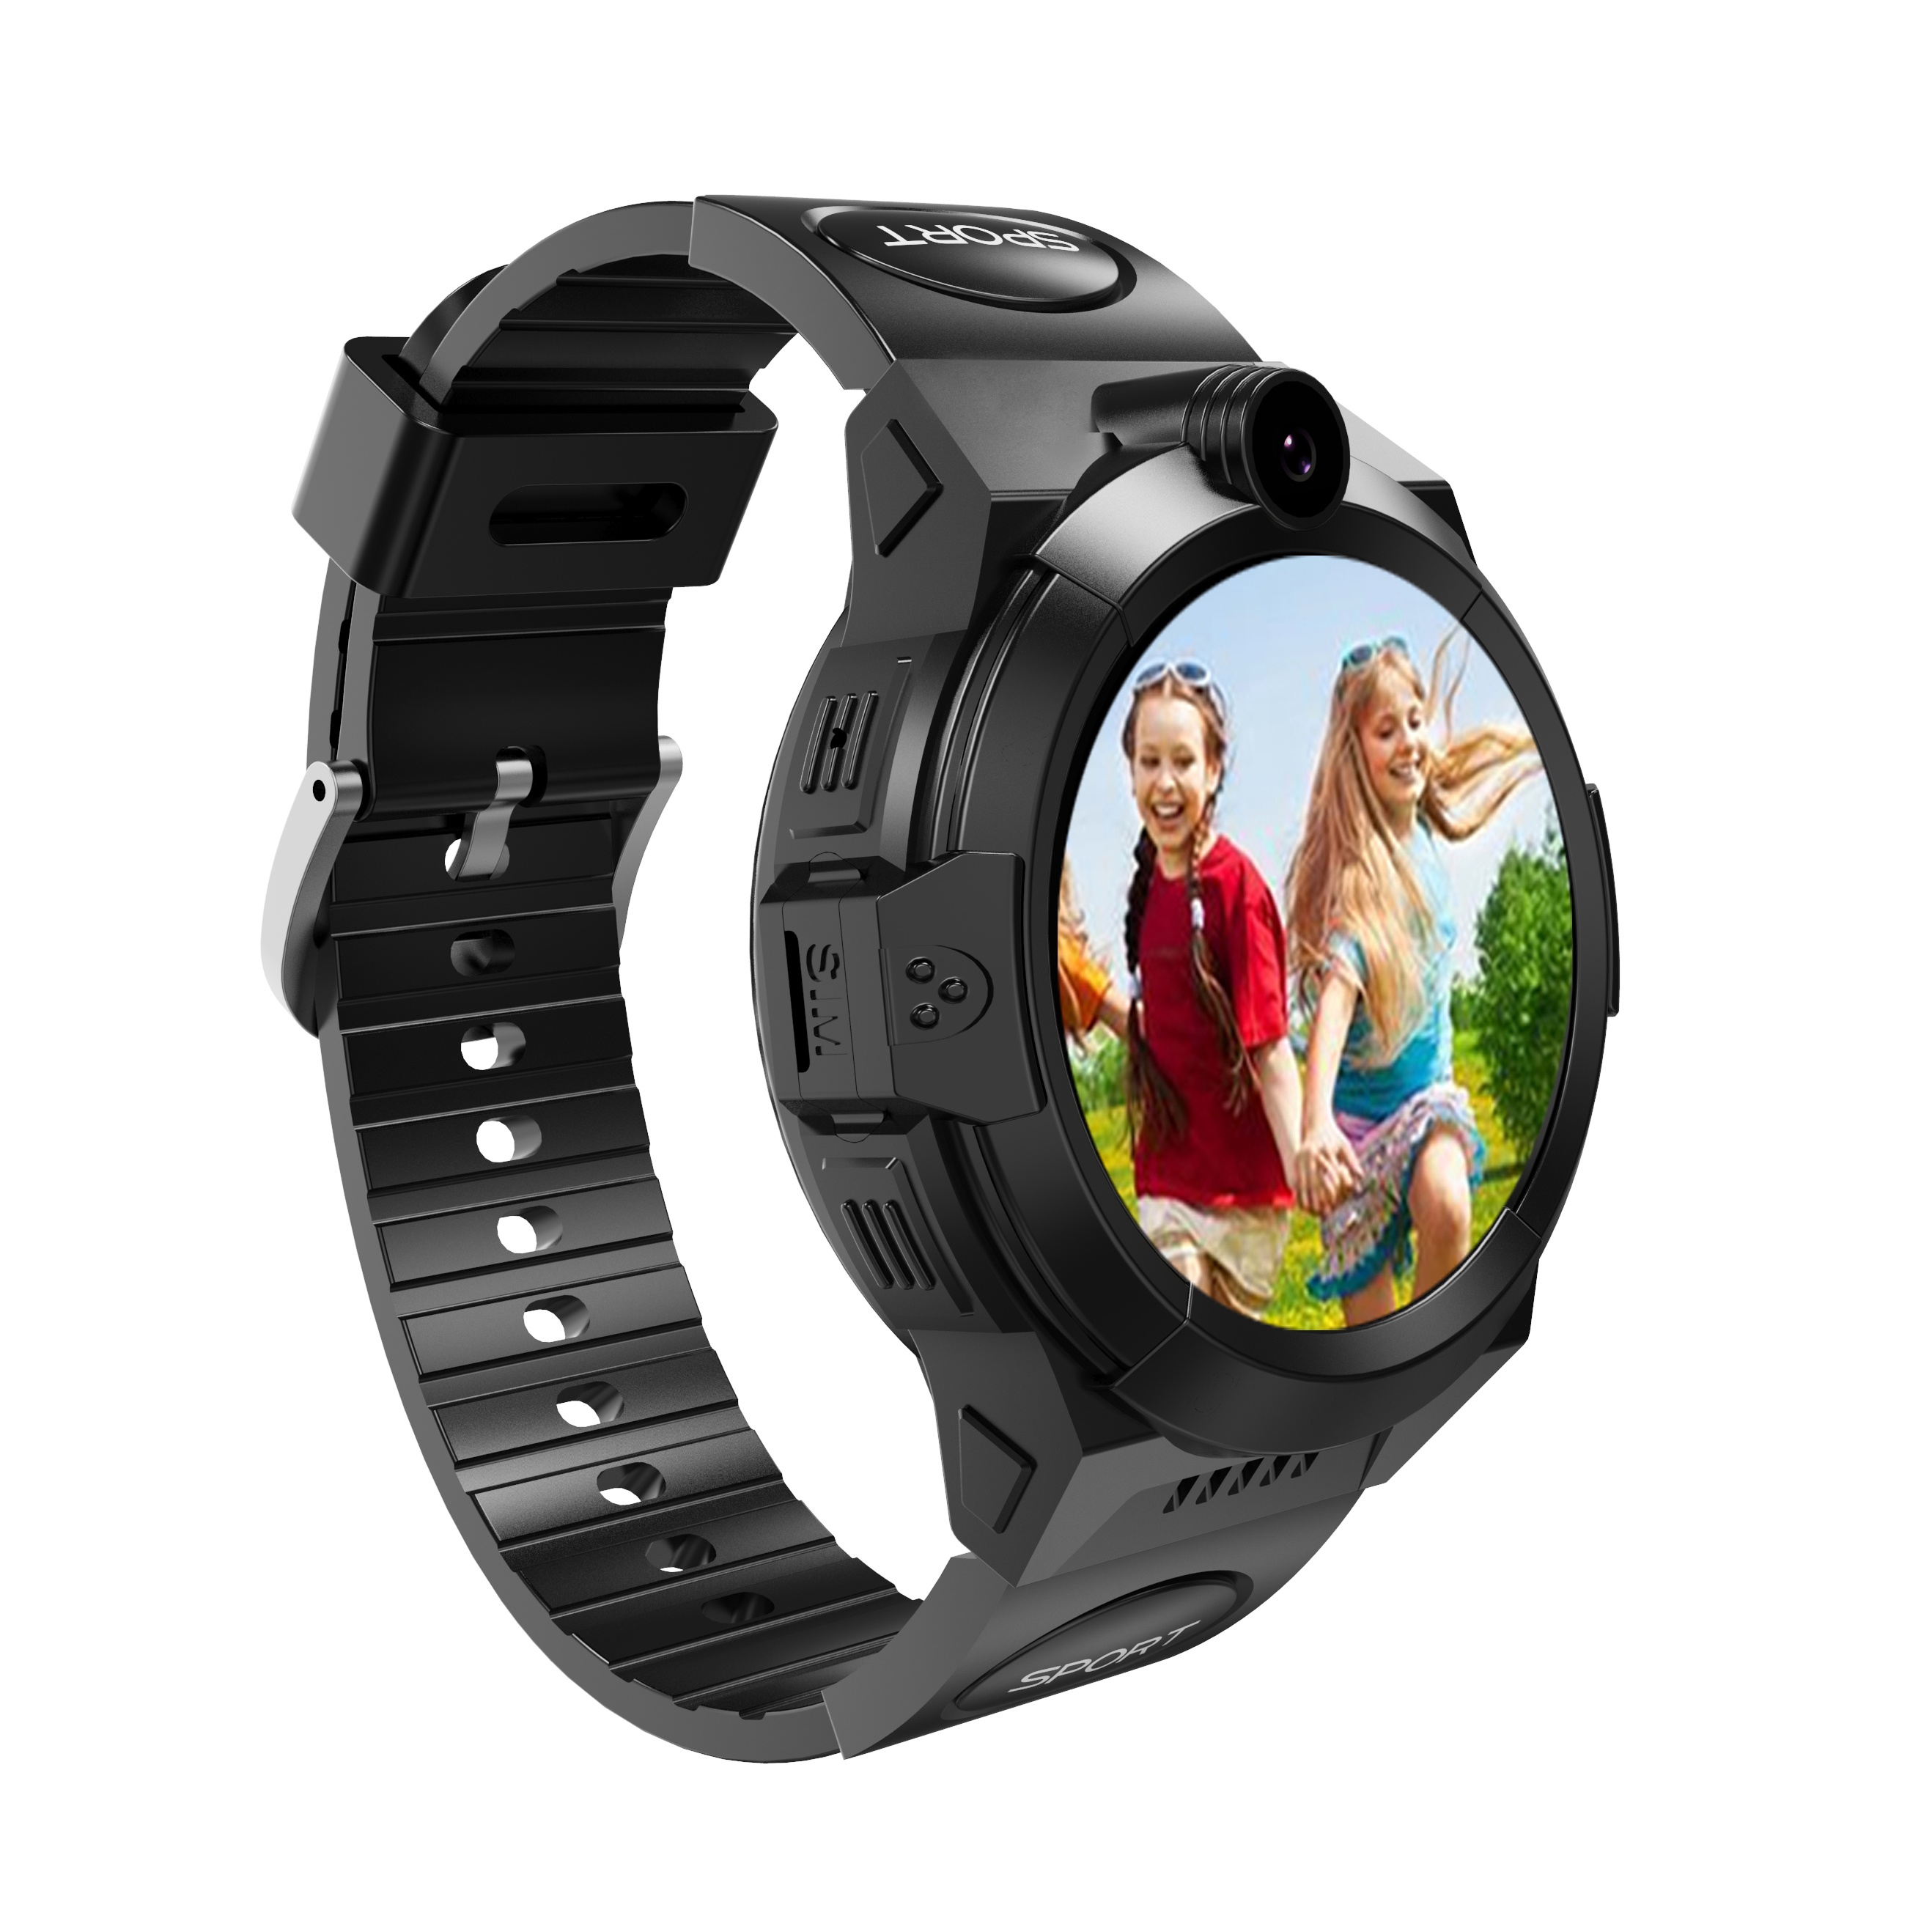 China High Quality 4G IP67 Waterproof Child Kids Security GPS Watch Tracker with Camera for Global Free Video Call D38